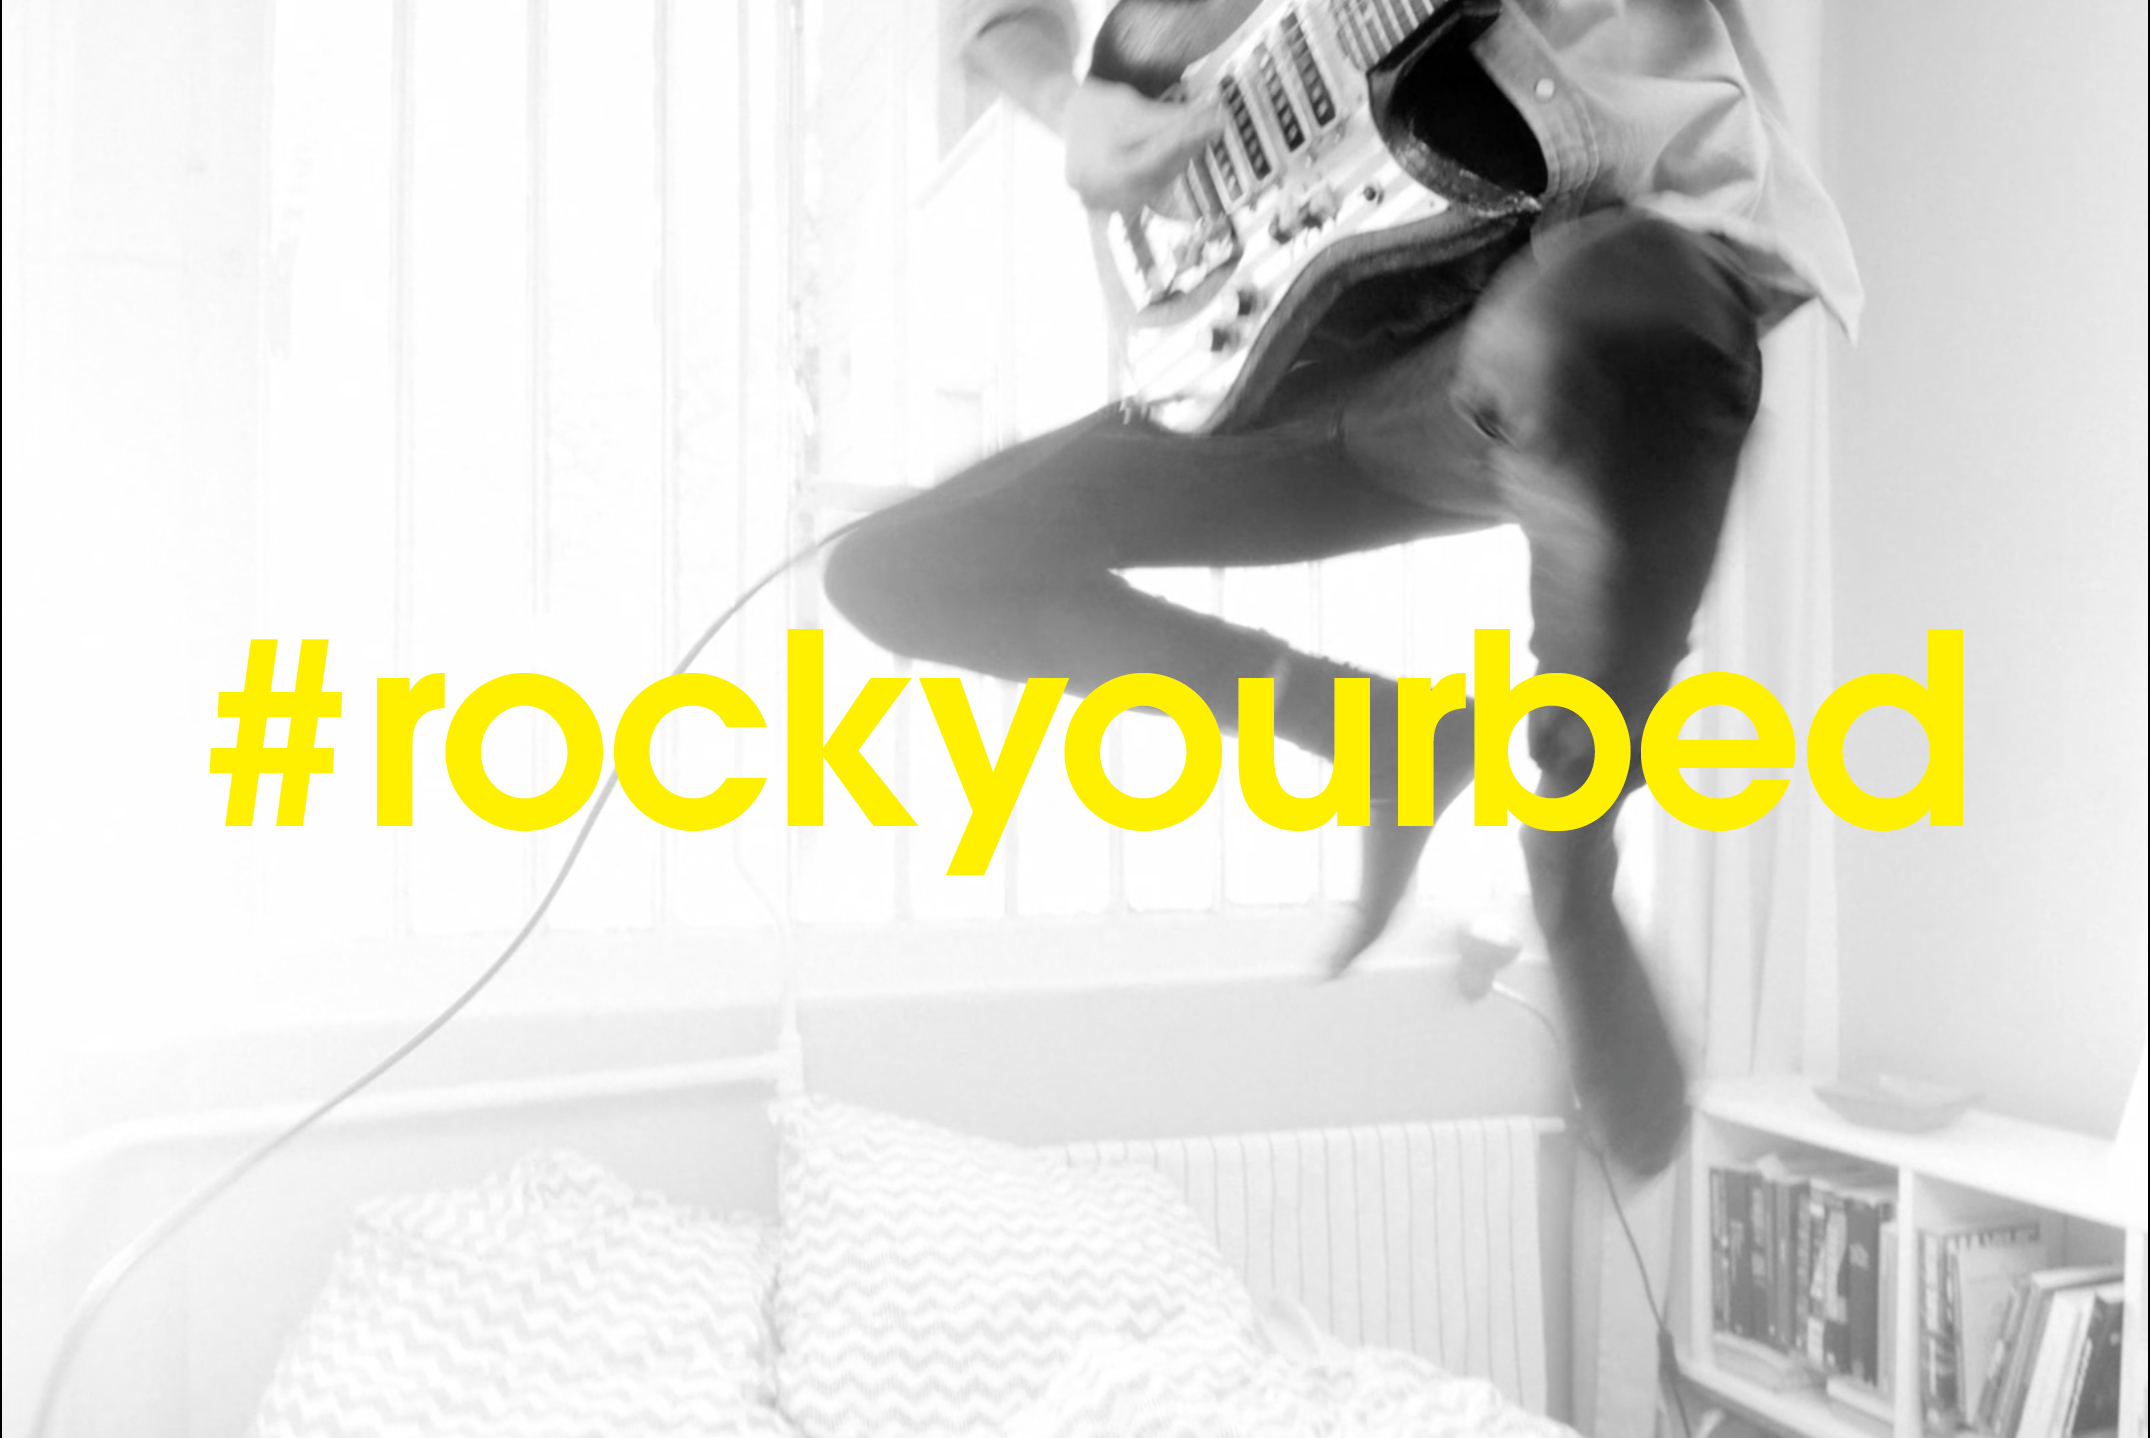 Rock your bed